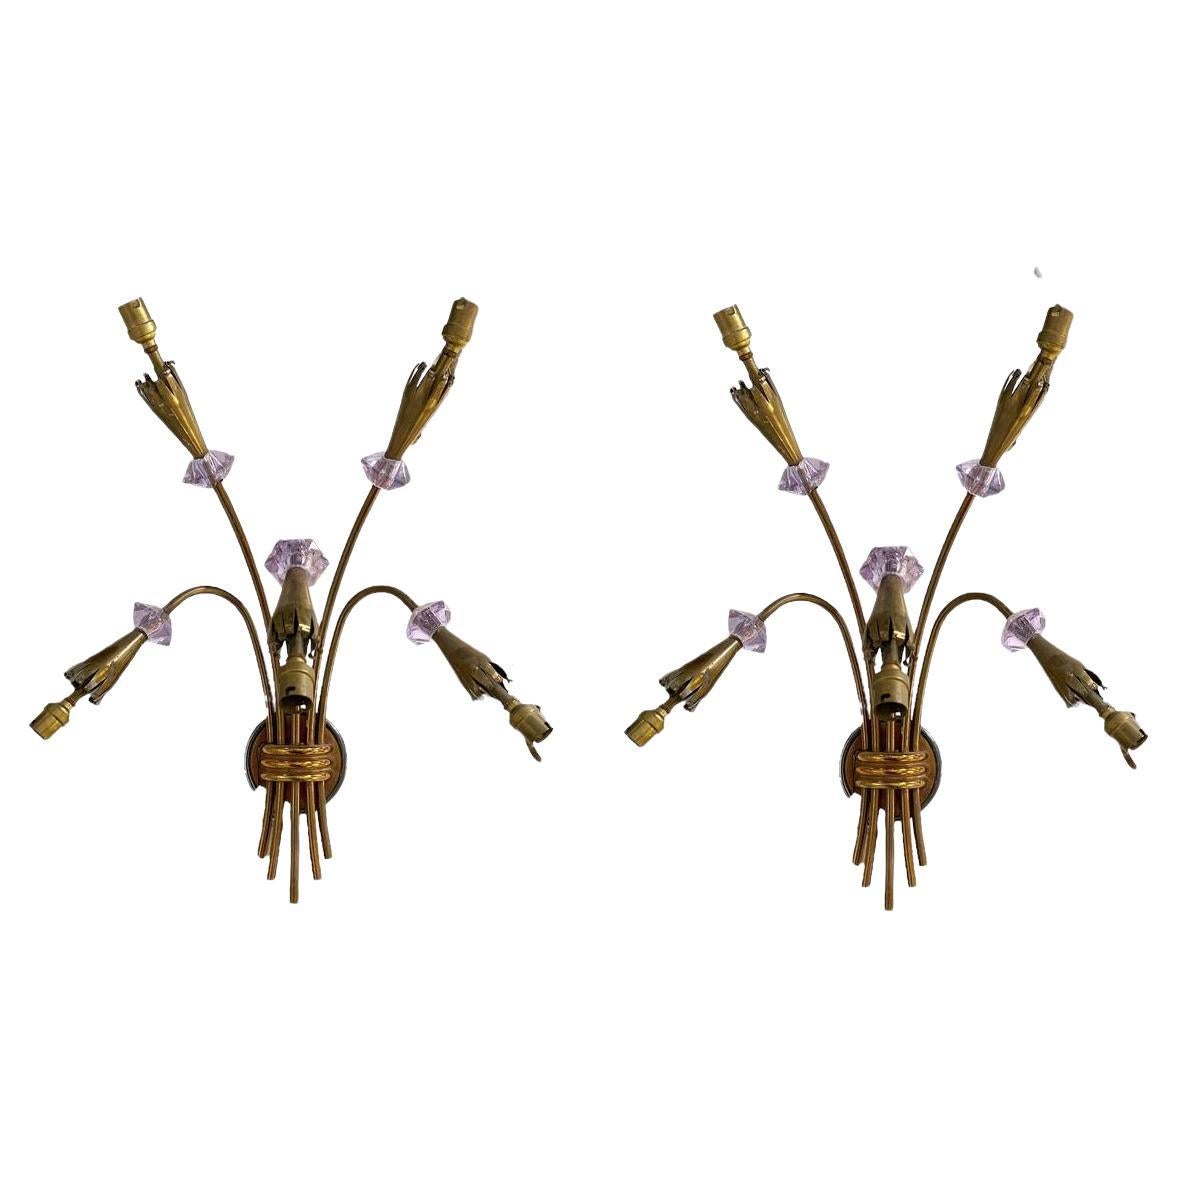 1930's French 5 Lights Tulips Sconces with Amethyst Crystals For Sale